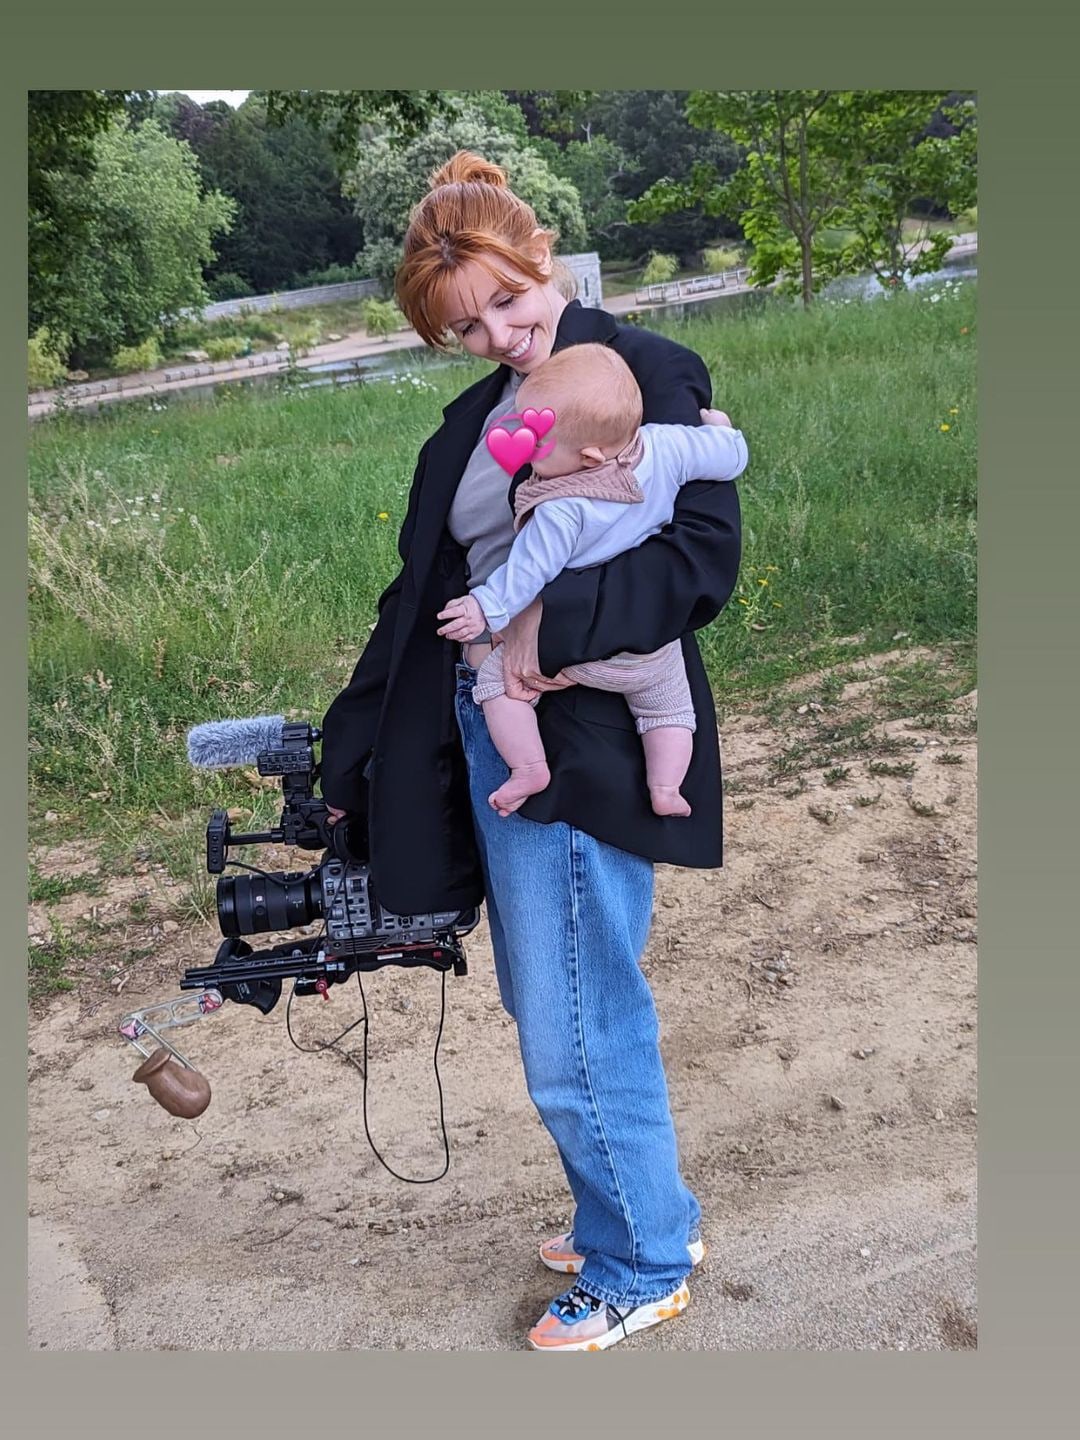 stacey dooley holding baby with camera 